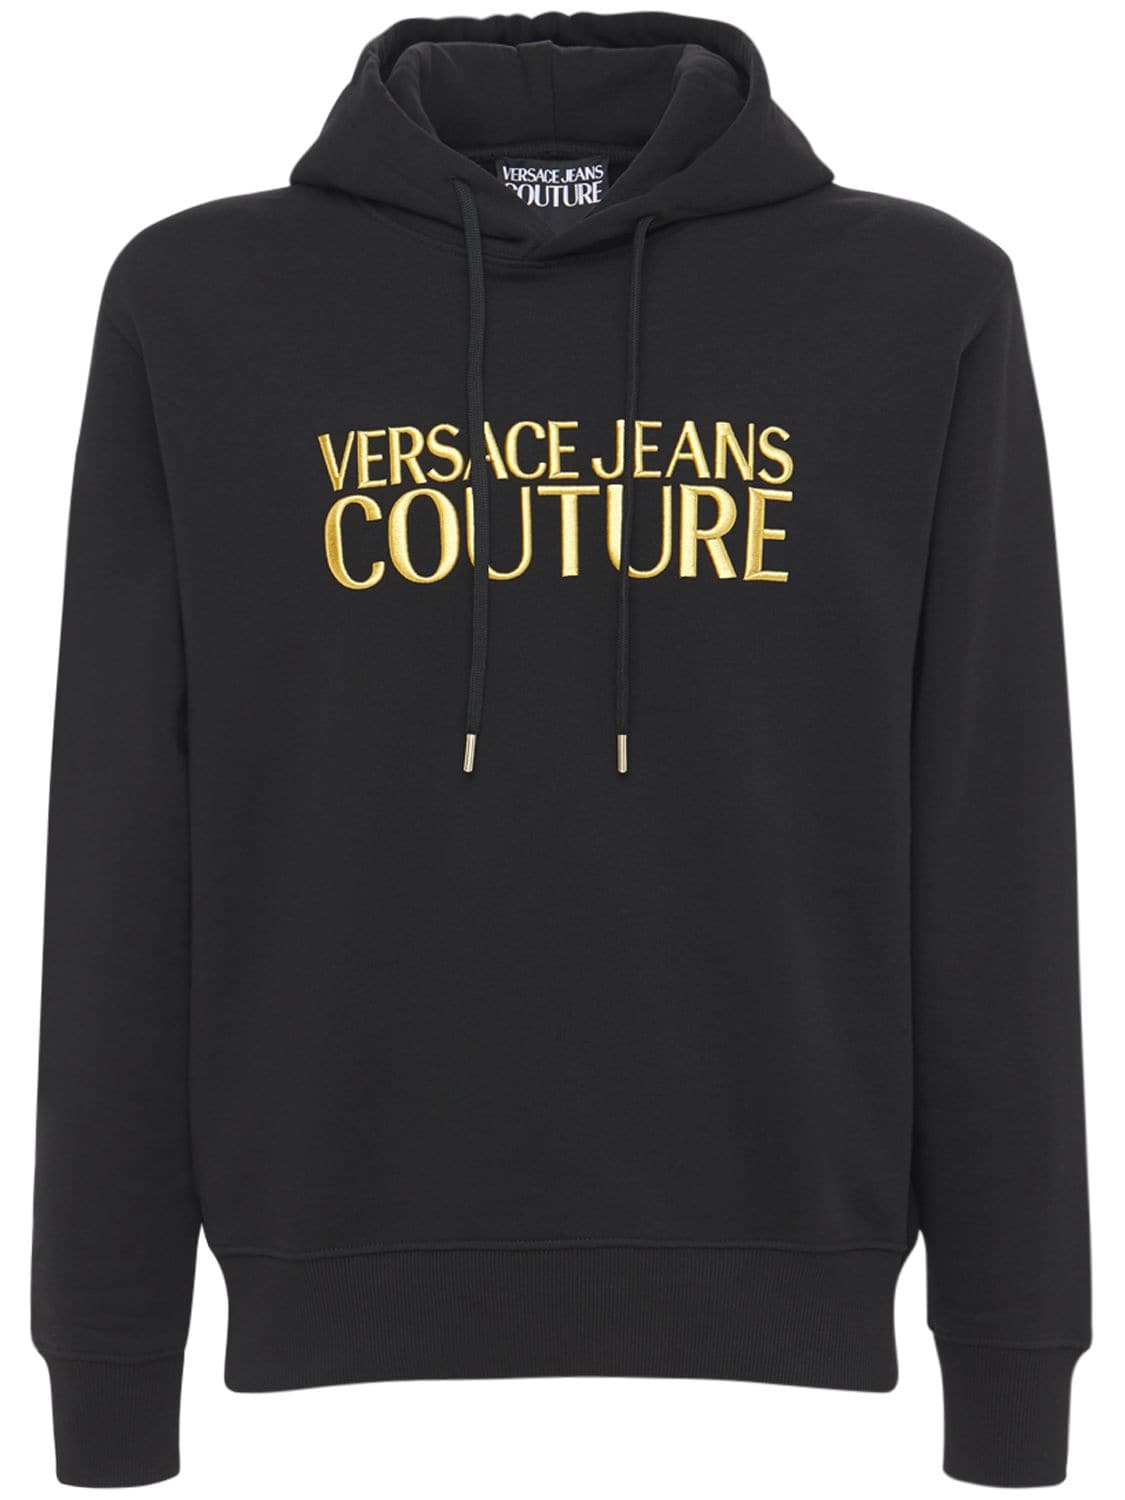 VERSACE JEANS COUTURE LOGO棉质连帽卫衣,74IBQN027-RZG50